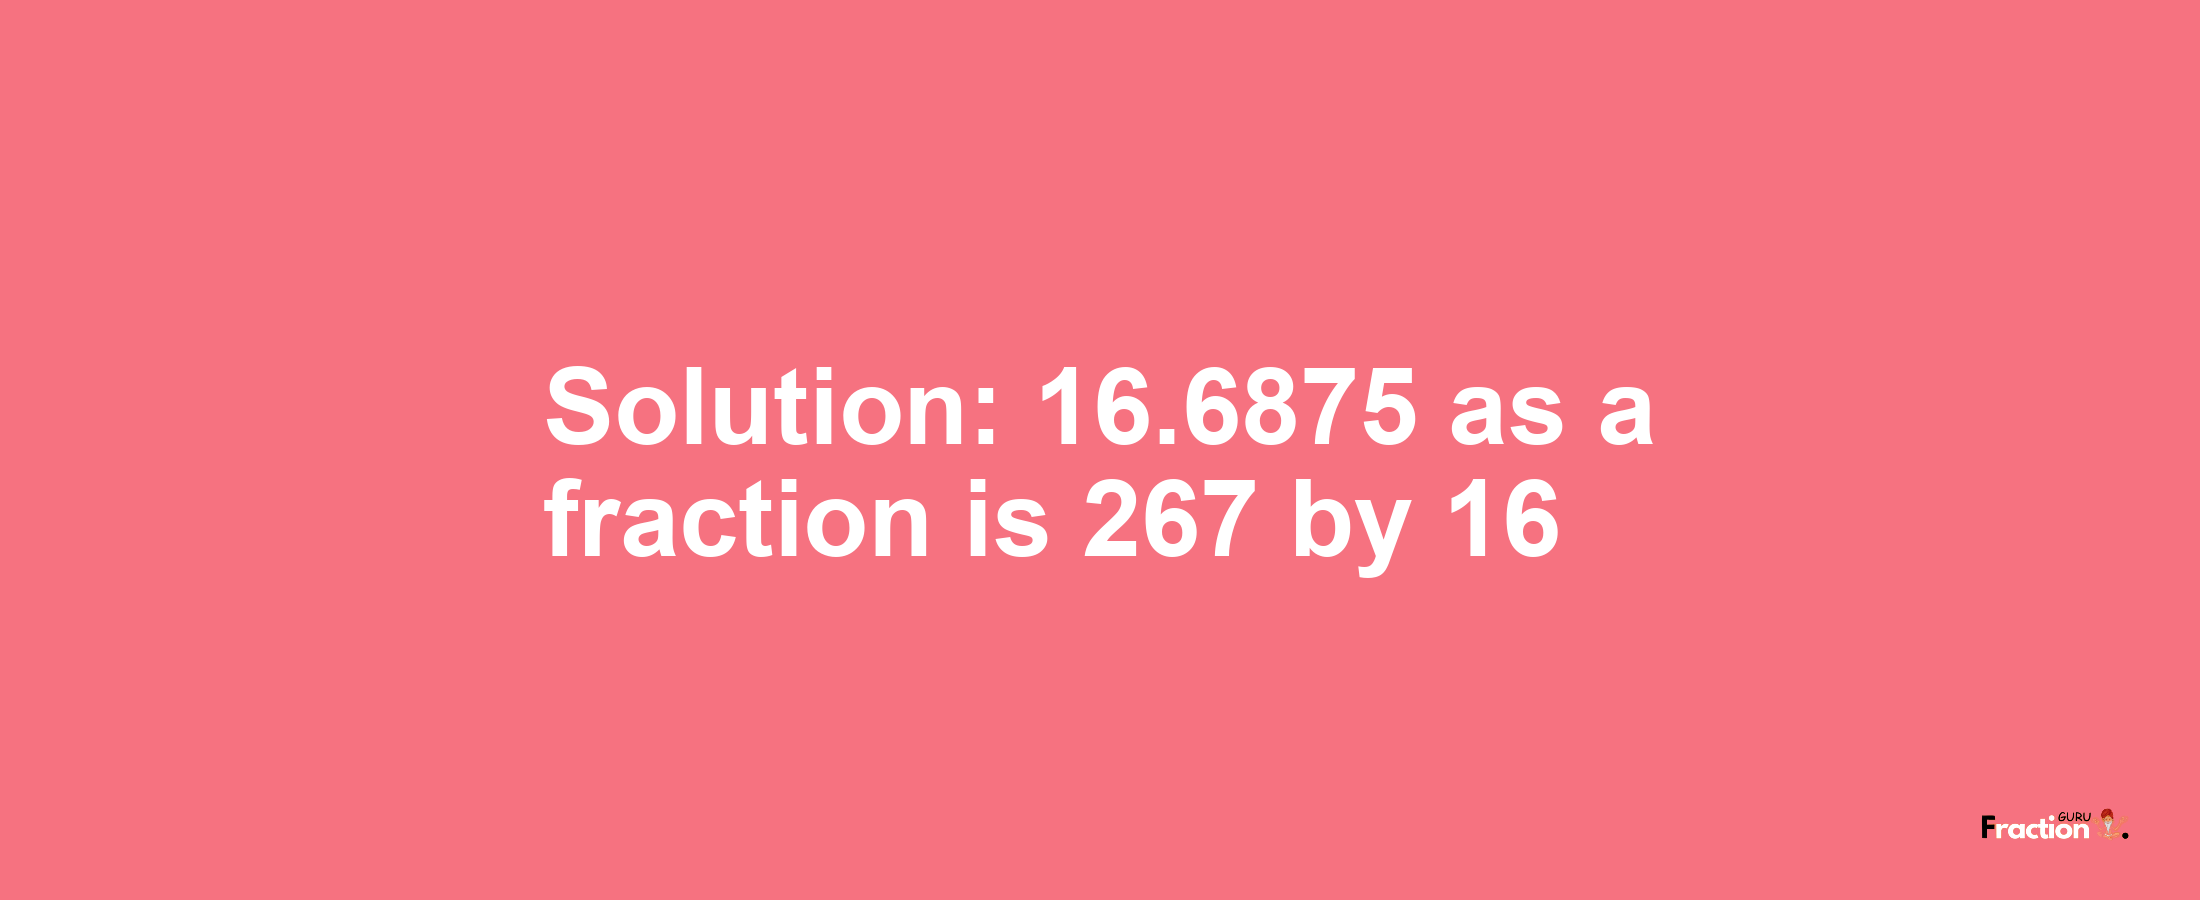 Solution:16.6875 as a fraction is 267/16